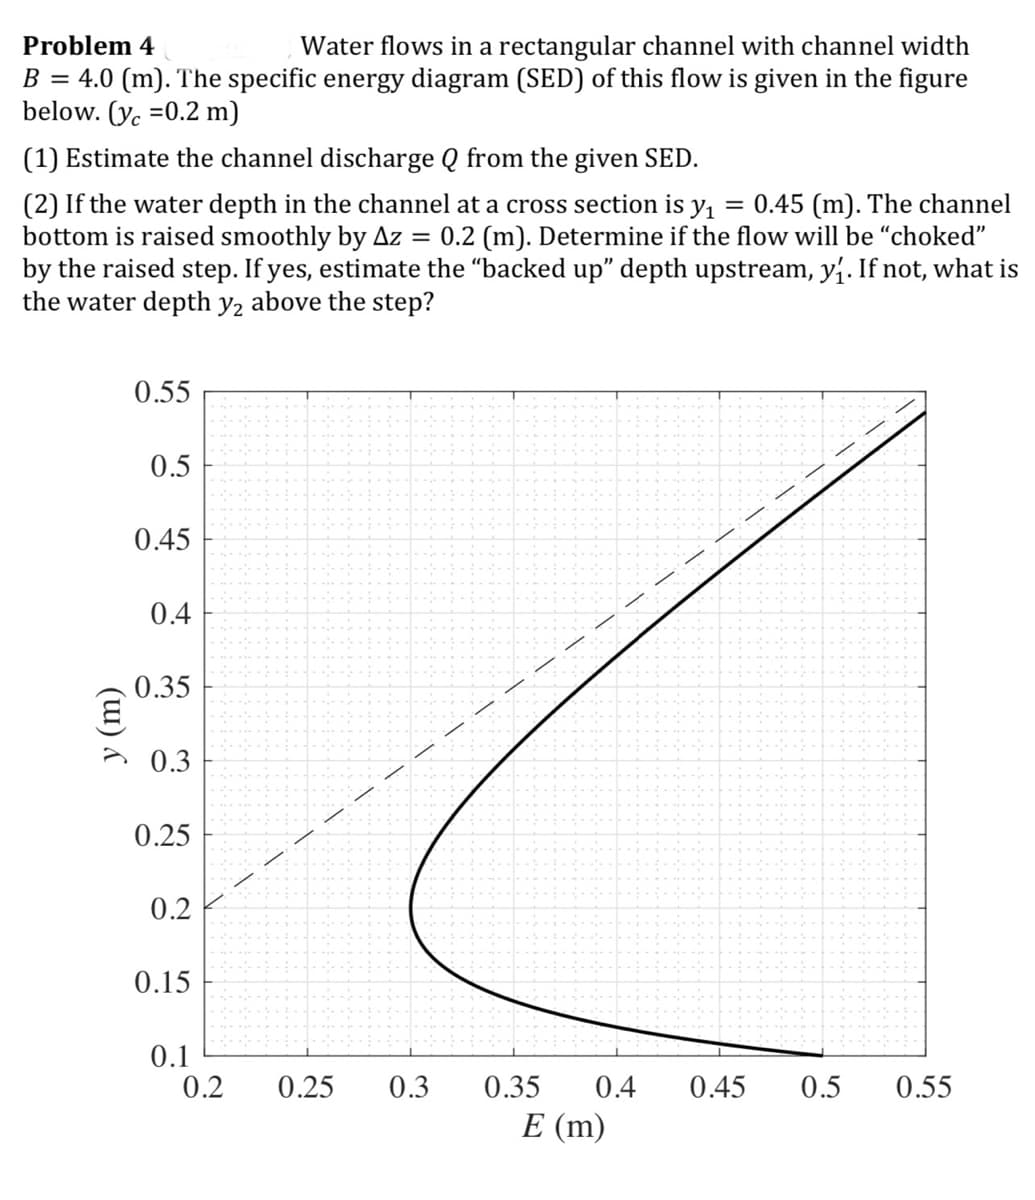 Problem 4
Water flows in a rectangular channel with channel width
B = 4.0 (m). The specific energy diagram (SED) of this flow is given in the figure
below. (y =0.2 m)
(1) Estimate the channel discharge Q from the given SED.
(2) If the water depth in the channel at a cross section is y₁ = 0.45 (m). The channel
bottom is raised smoothly by Az = 0.2 (m). Determine if the flow will be "choked"
by the raised step. If yes, estimate the "backed up” depth upstream, y₁. If not, what is
the water depth y₂ above the step?
y (m)
0.55
0.5
0.45
0.4
0.35
> 0.3
0.25
0.2
0.15
0.1
0.2
0.25
0.3
0.35 0.4
0.45 0.5
0.55
E (m)